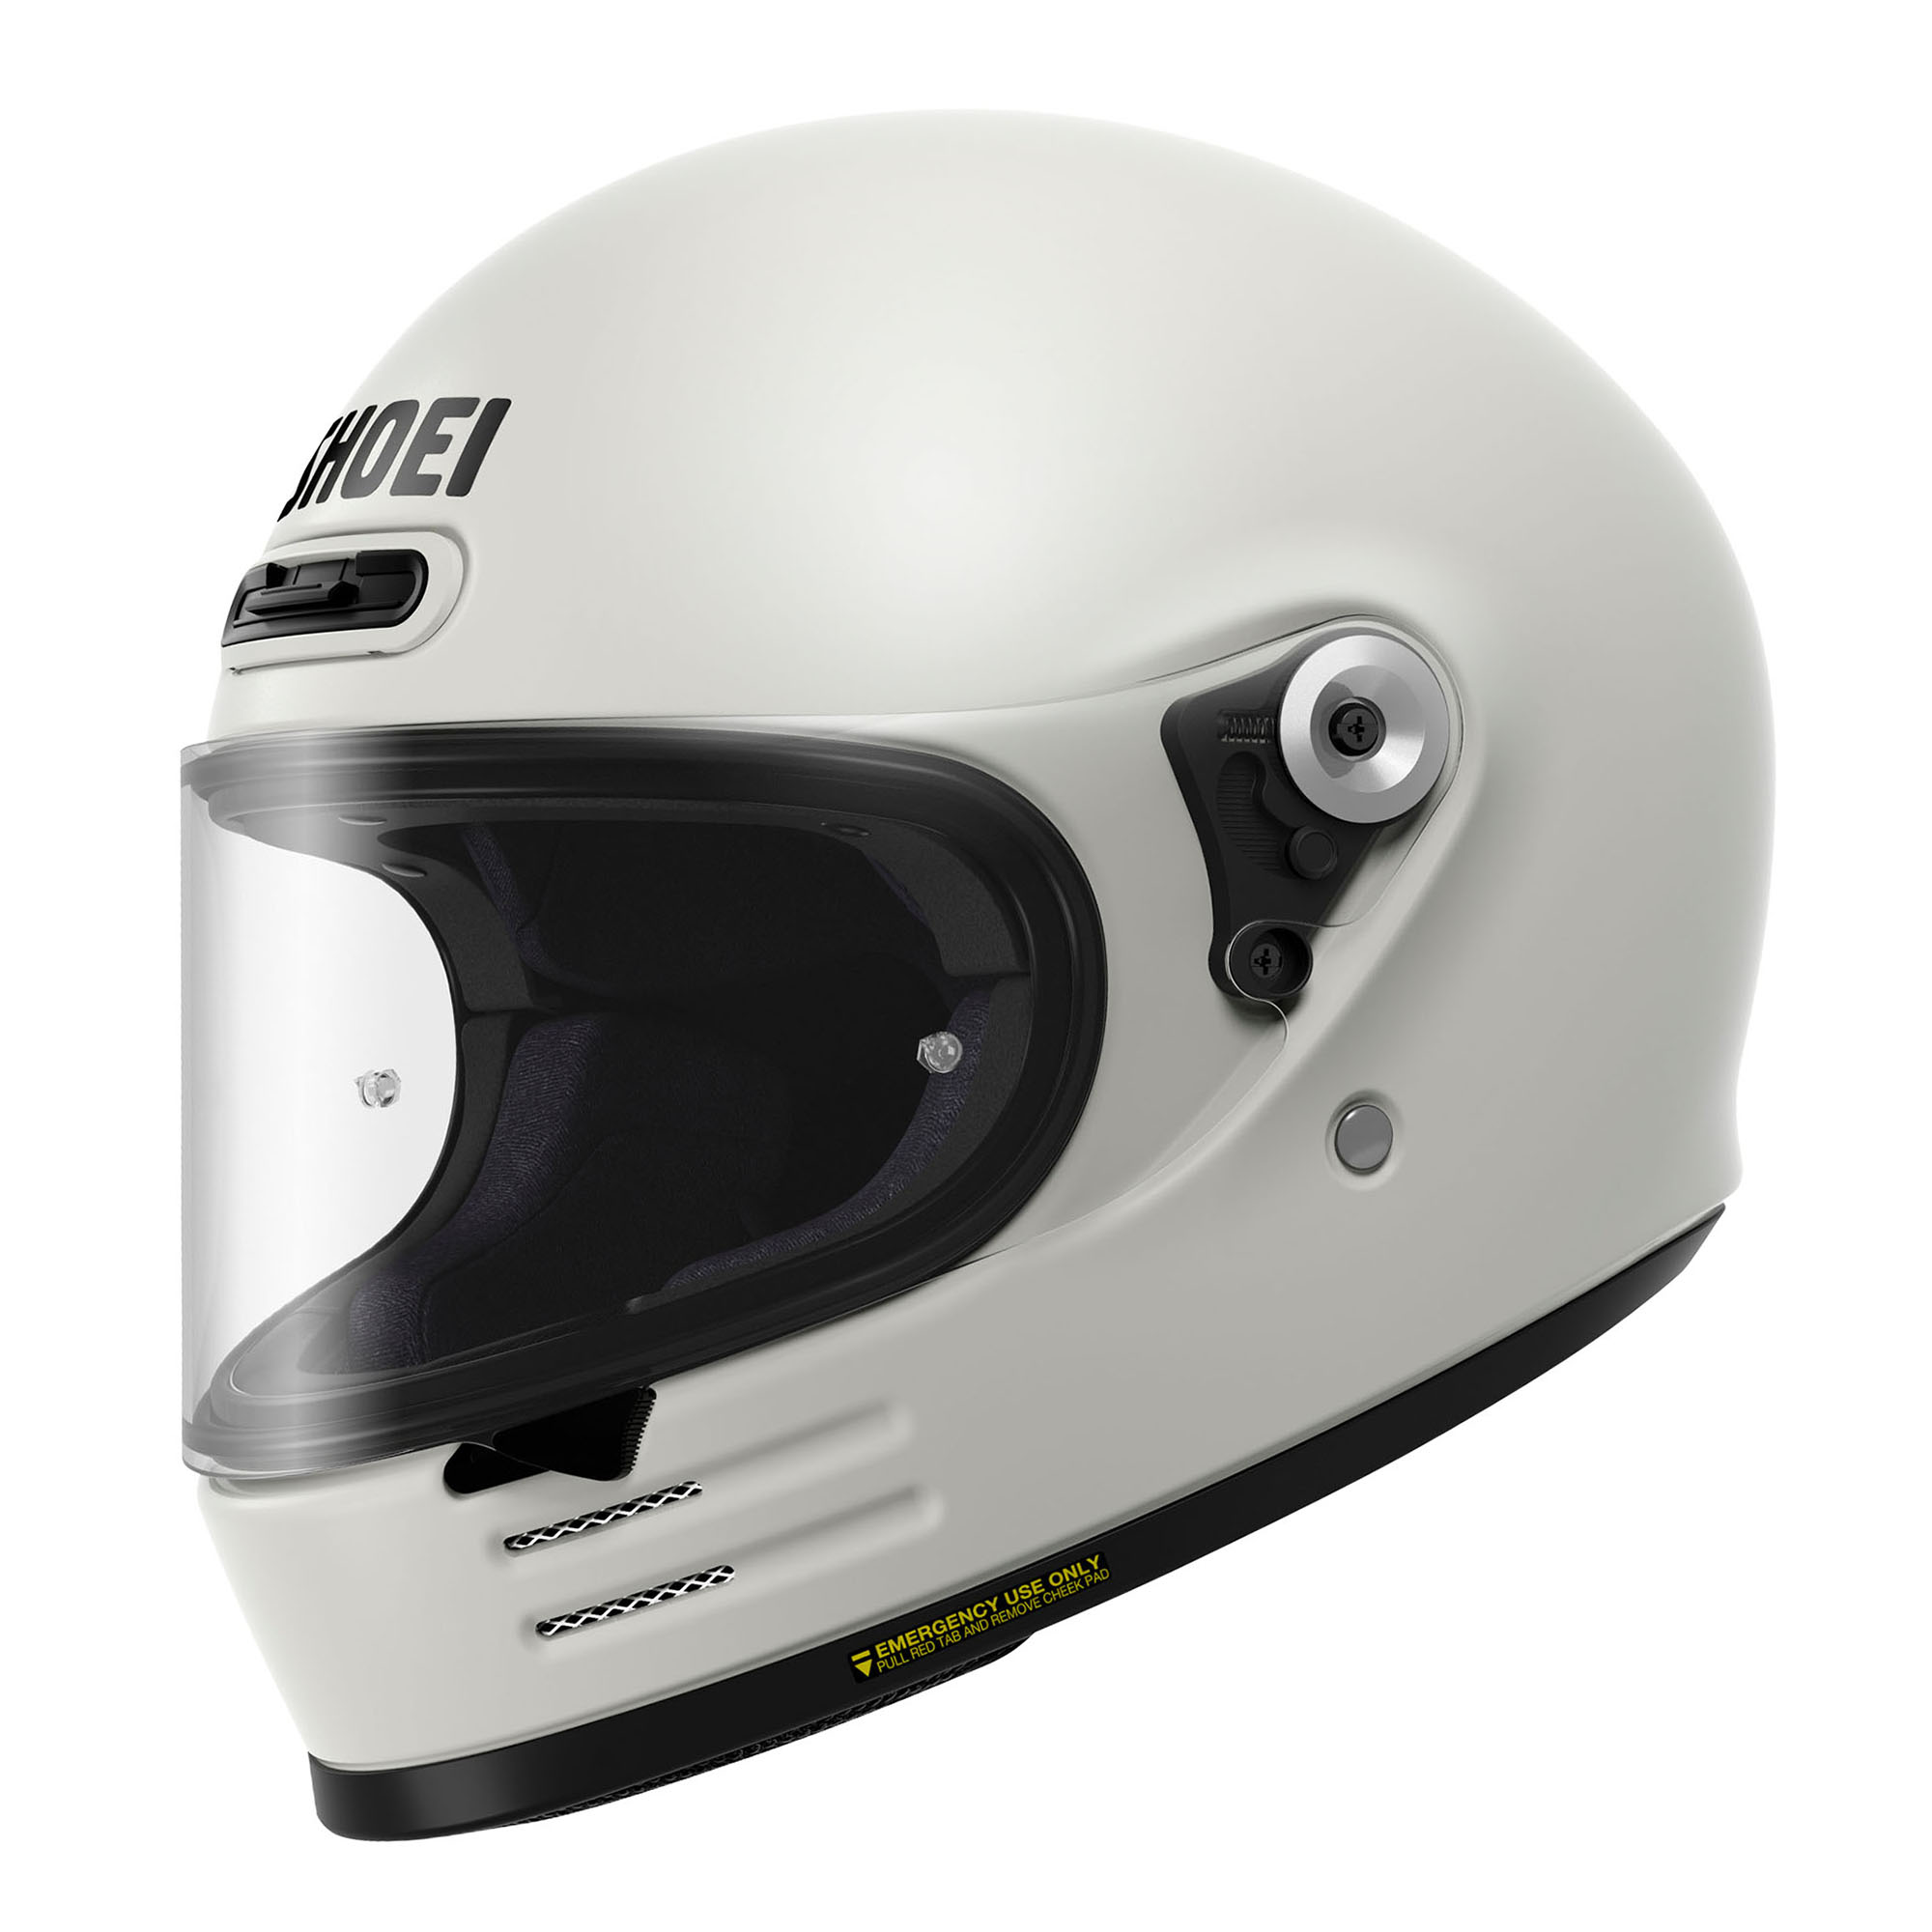 Image of EU Shoei Glamster 06 Plain Off Blanc Casque Intégral Taille 2XL